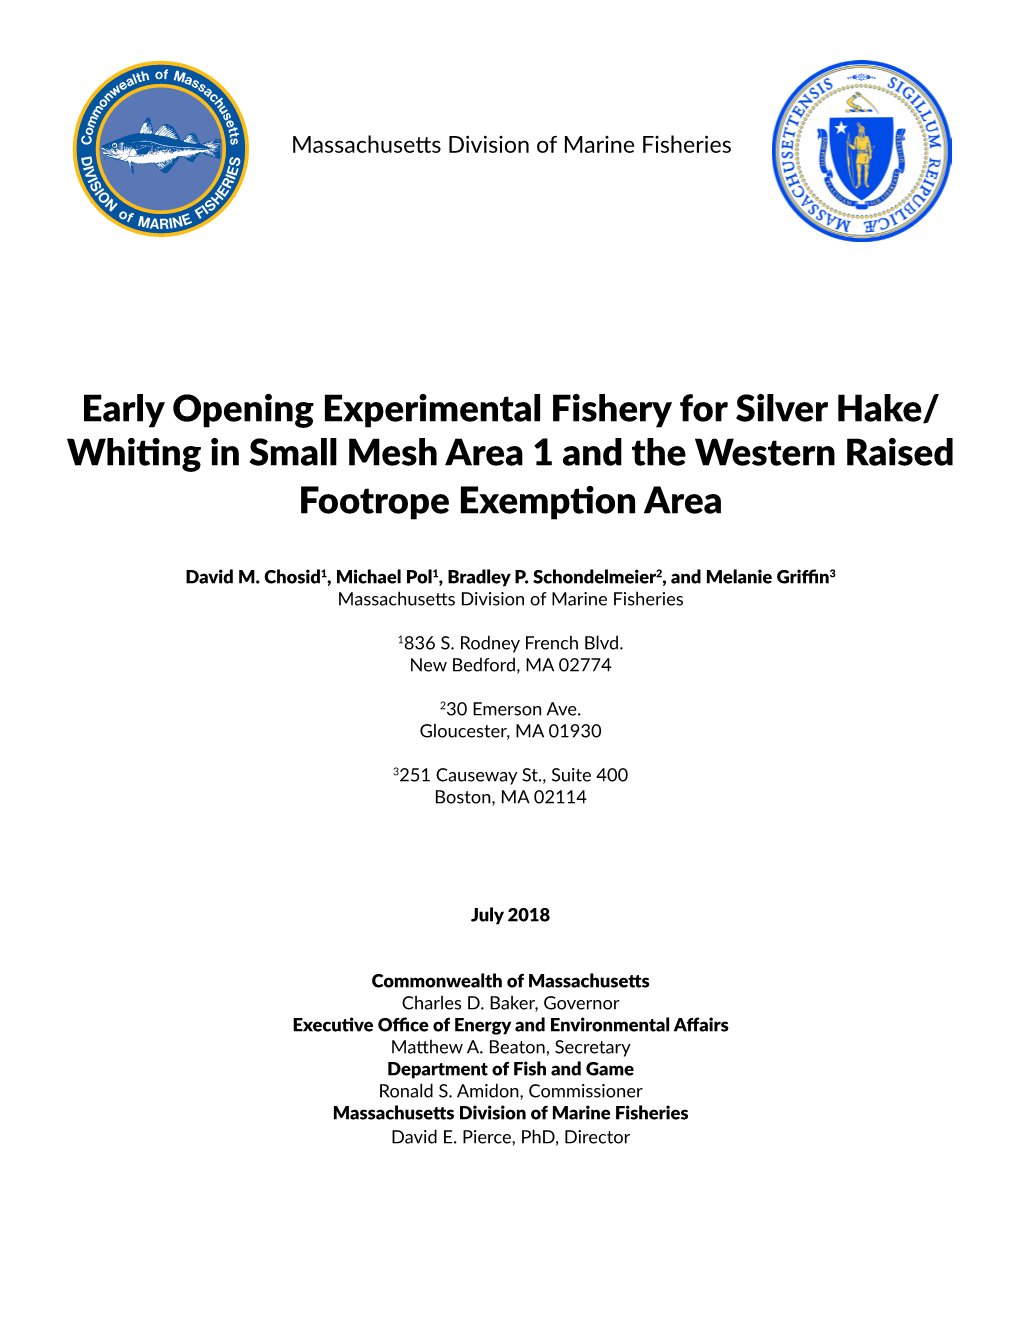 Early Opening Experimental Fishery for Silver Hake/ Whiting in Small Mesh Area 1 and the Western Raised Footrope Exemption Area